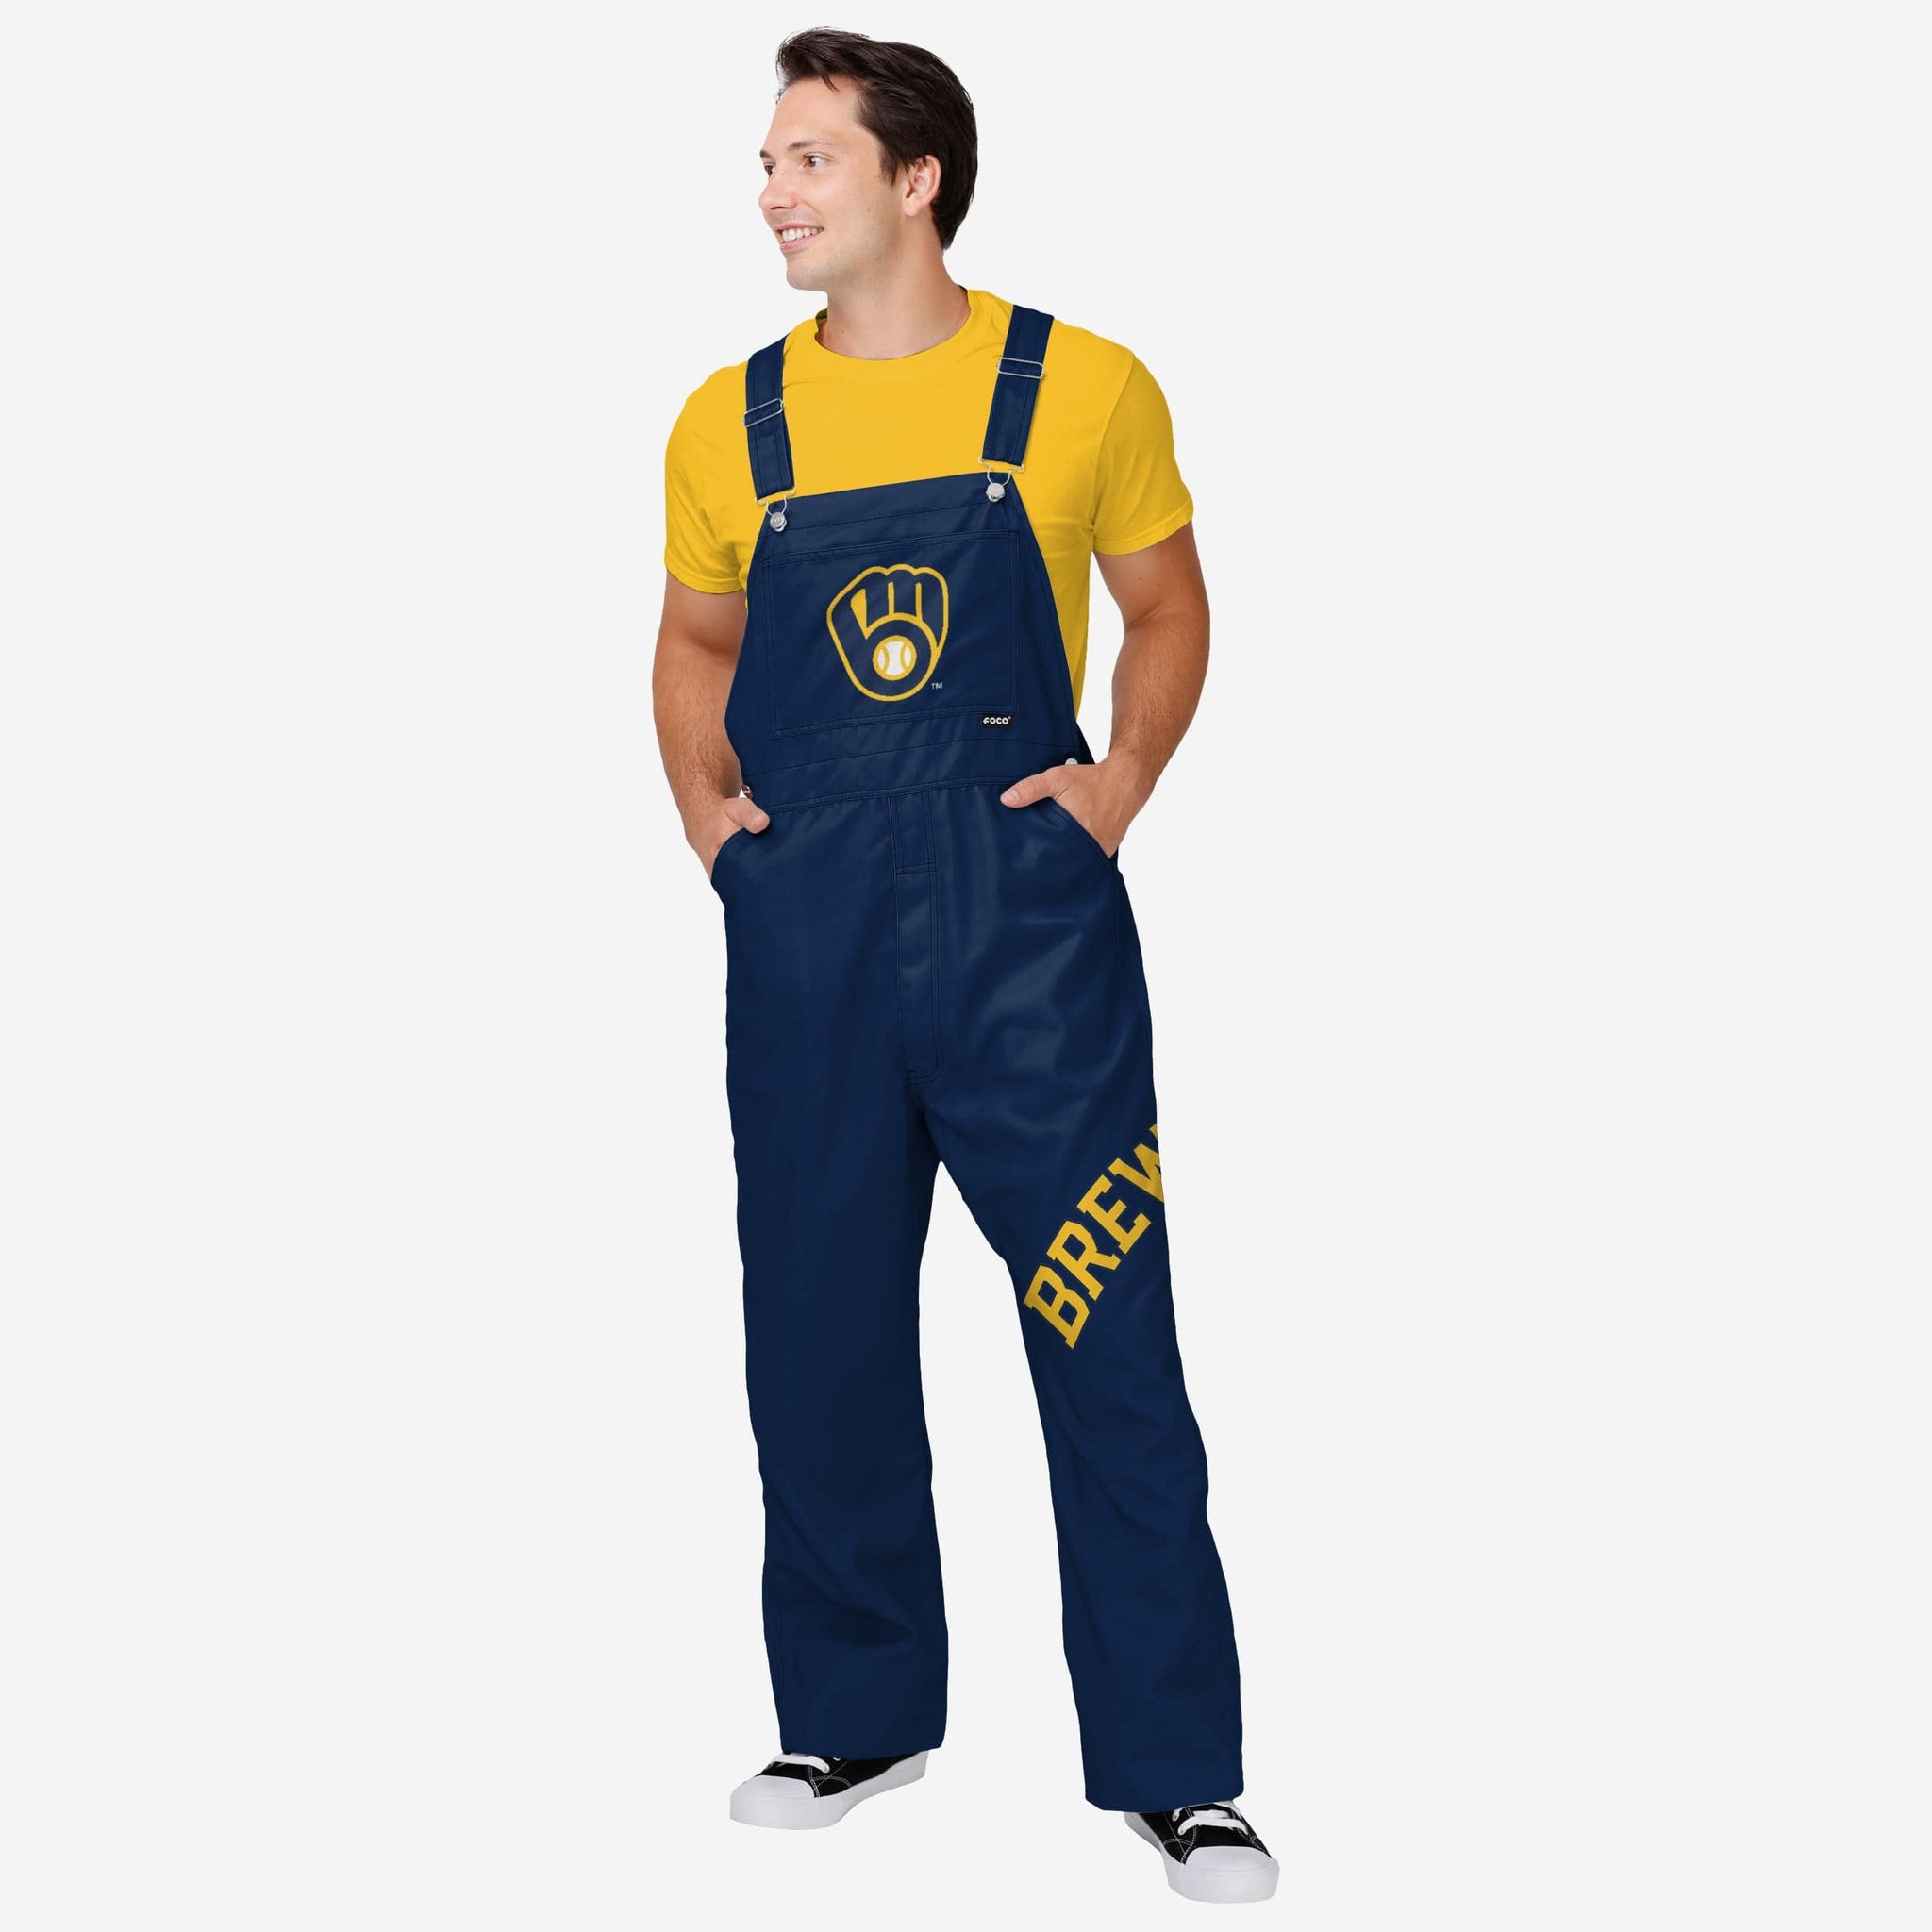 Milwaukee Brewers Plus Sizes Clothing, Brewers Plus Sizes Apparel